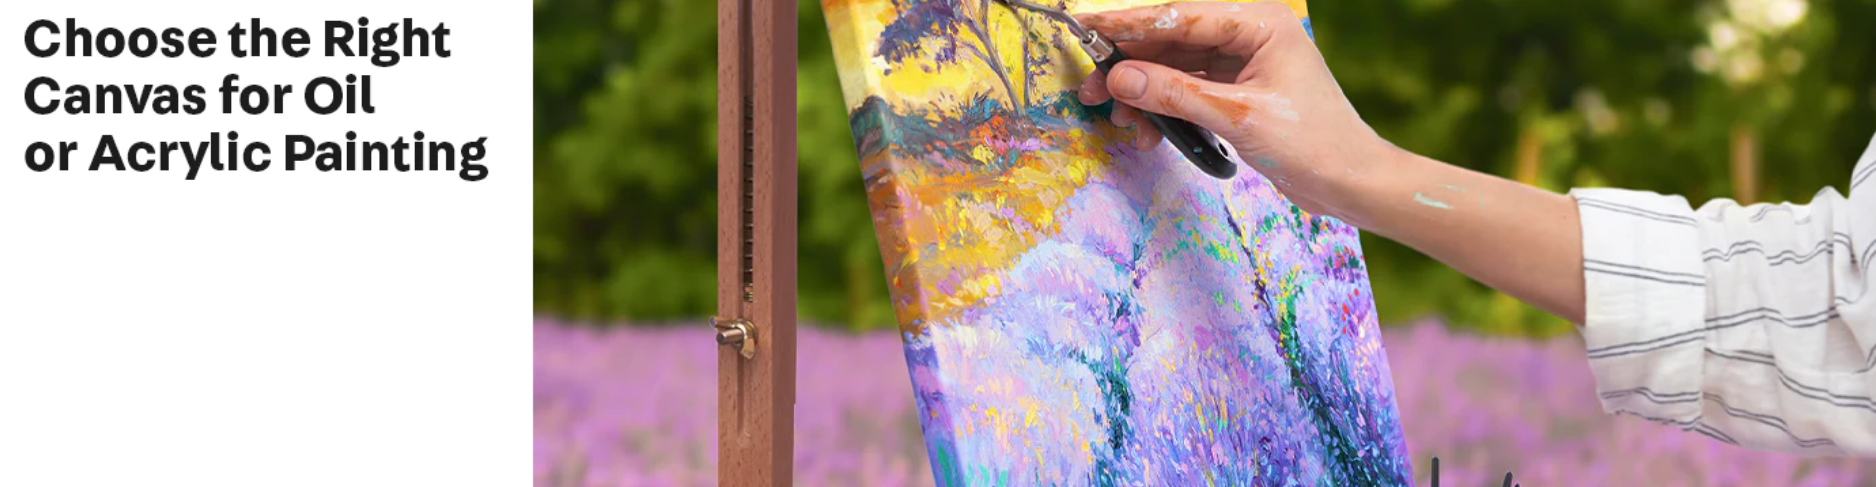 The Best Spray Paints for Canvas (and other surfaces) - Draw Paint